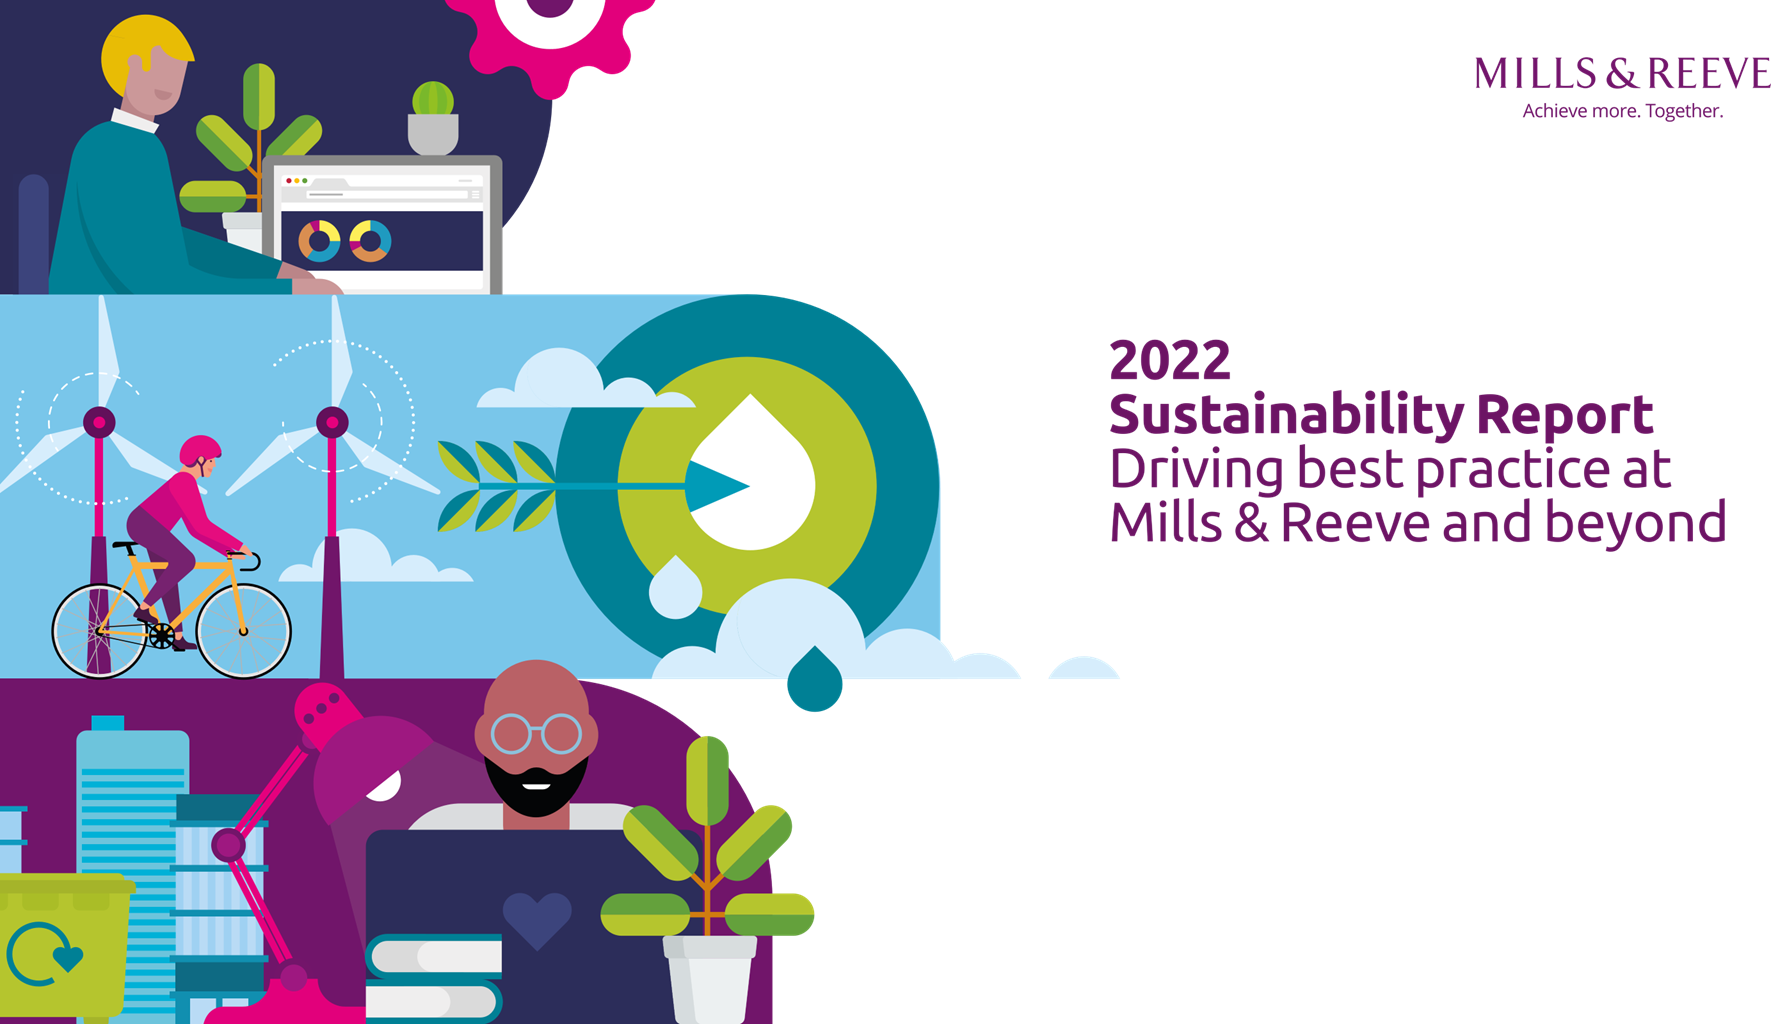 Our sustainability report 2022: driving best practice at Mills & Reeve and beyond